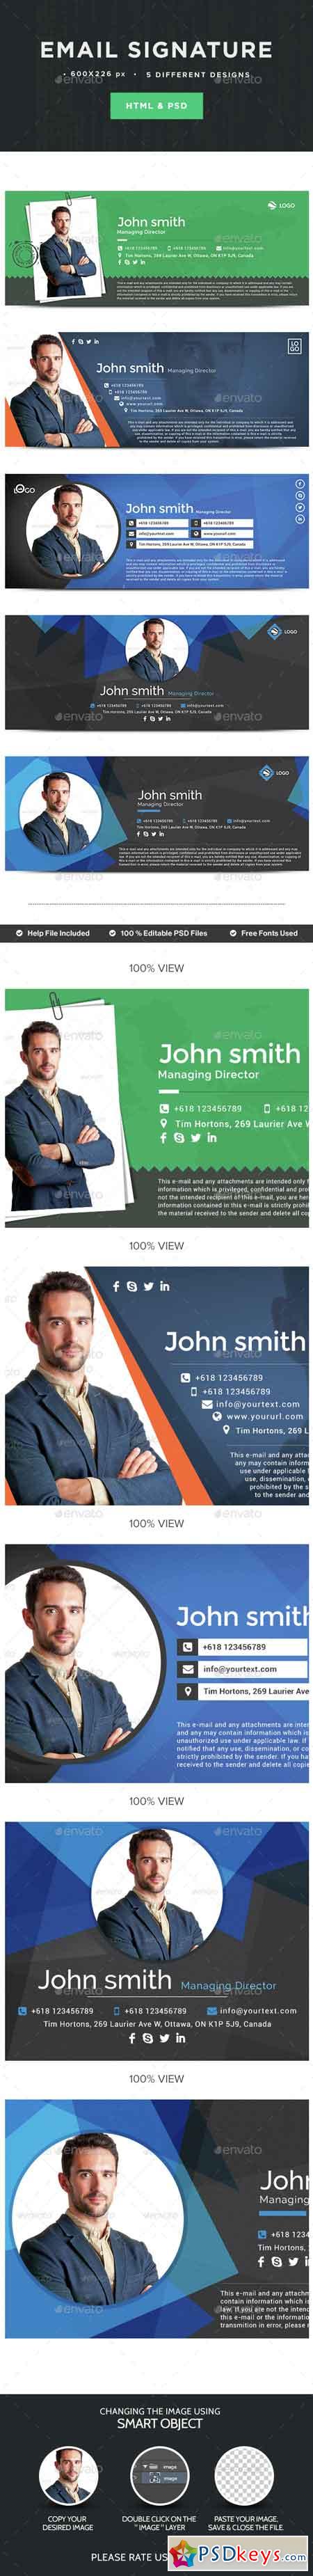 Email Signature - 5 Designs - HTML Files Included 15466768